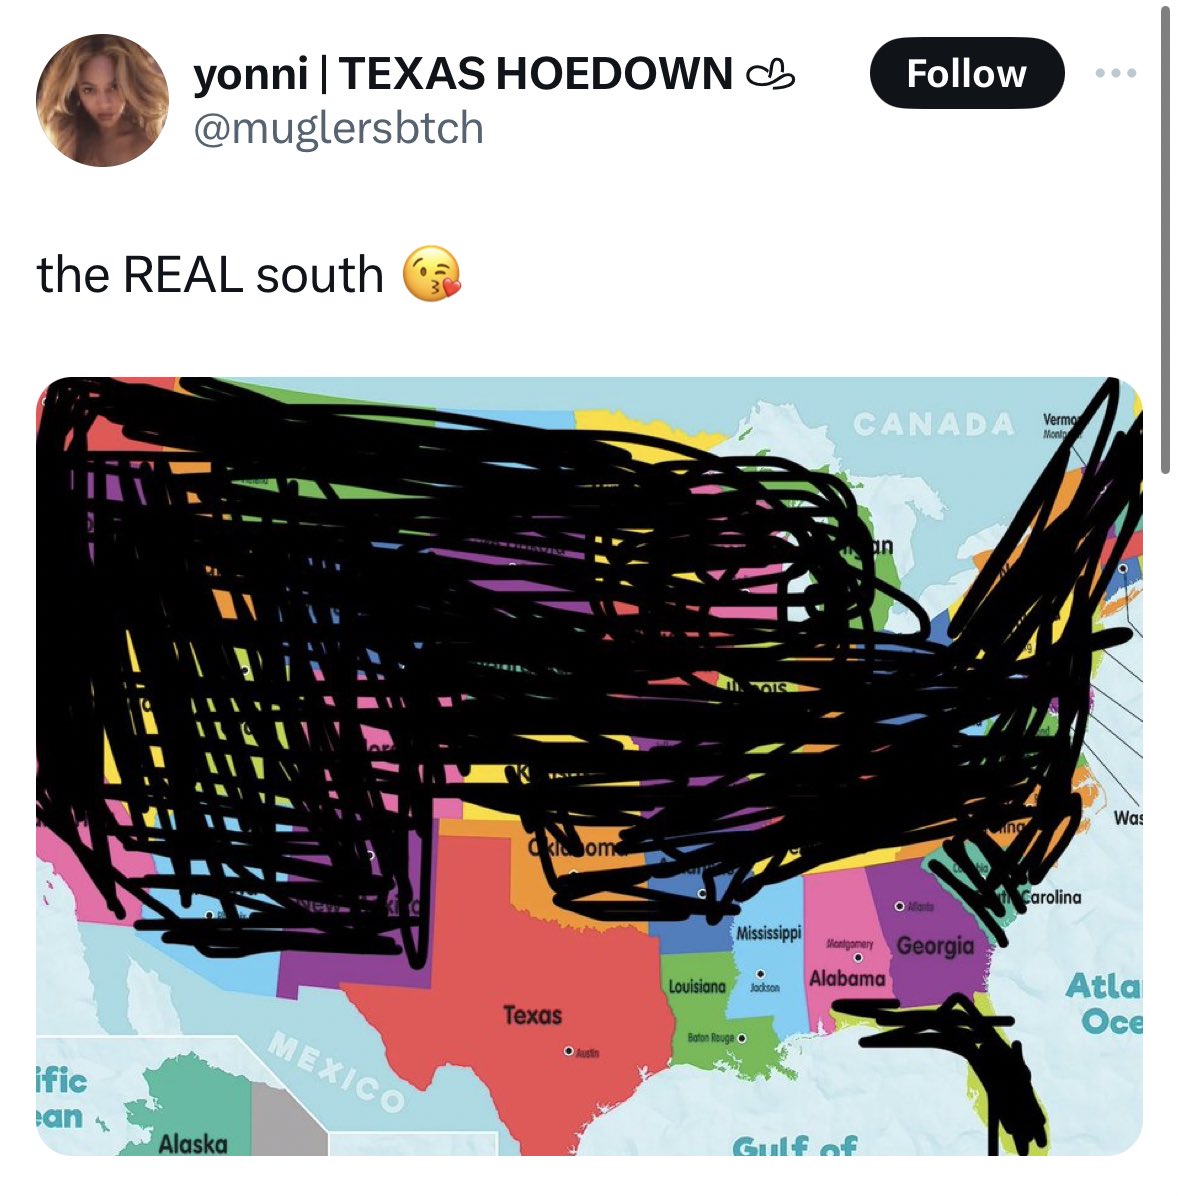 The original post is just engagement farming, but it’s objectively hilarious that Texas was included and SOUTH Carolina was left out.